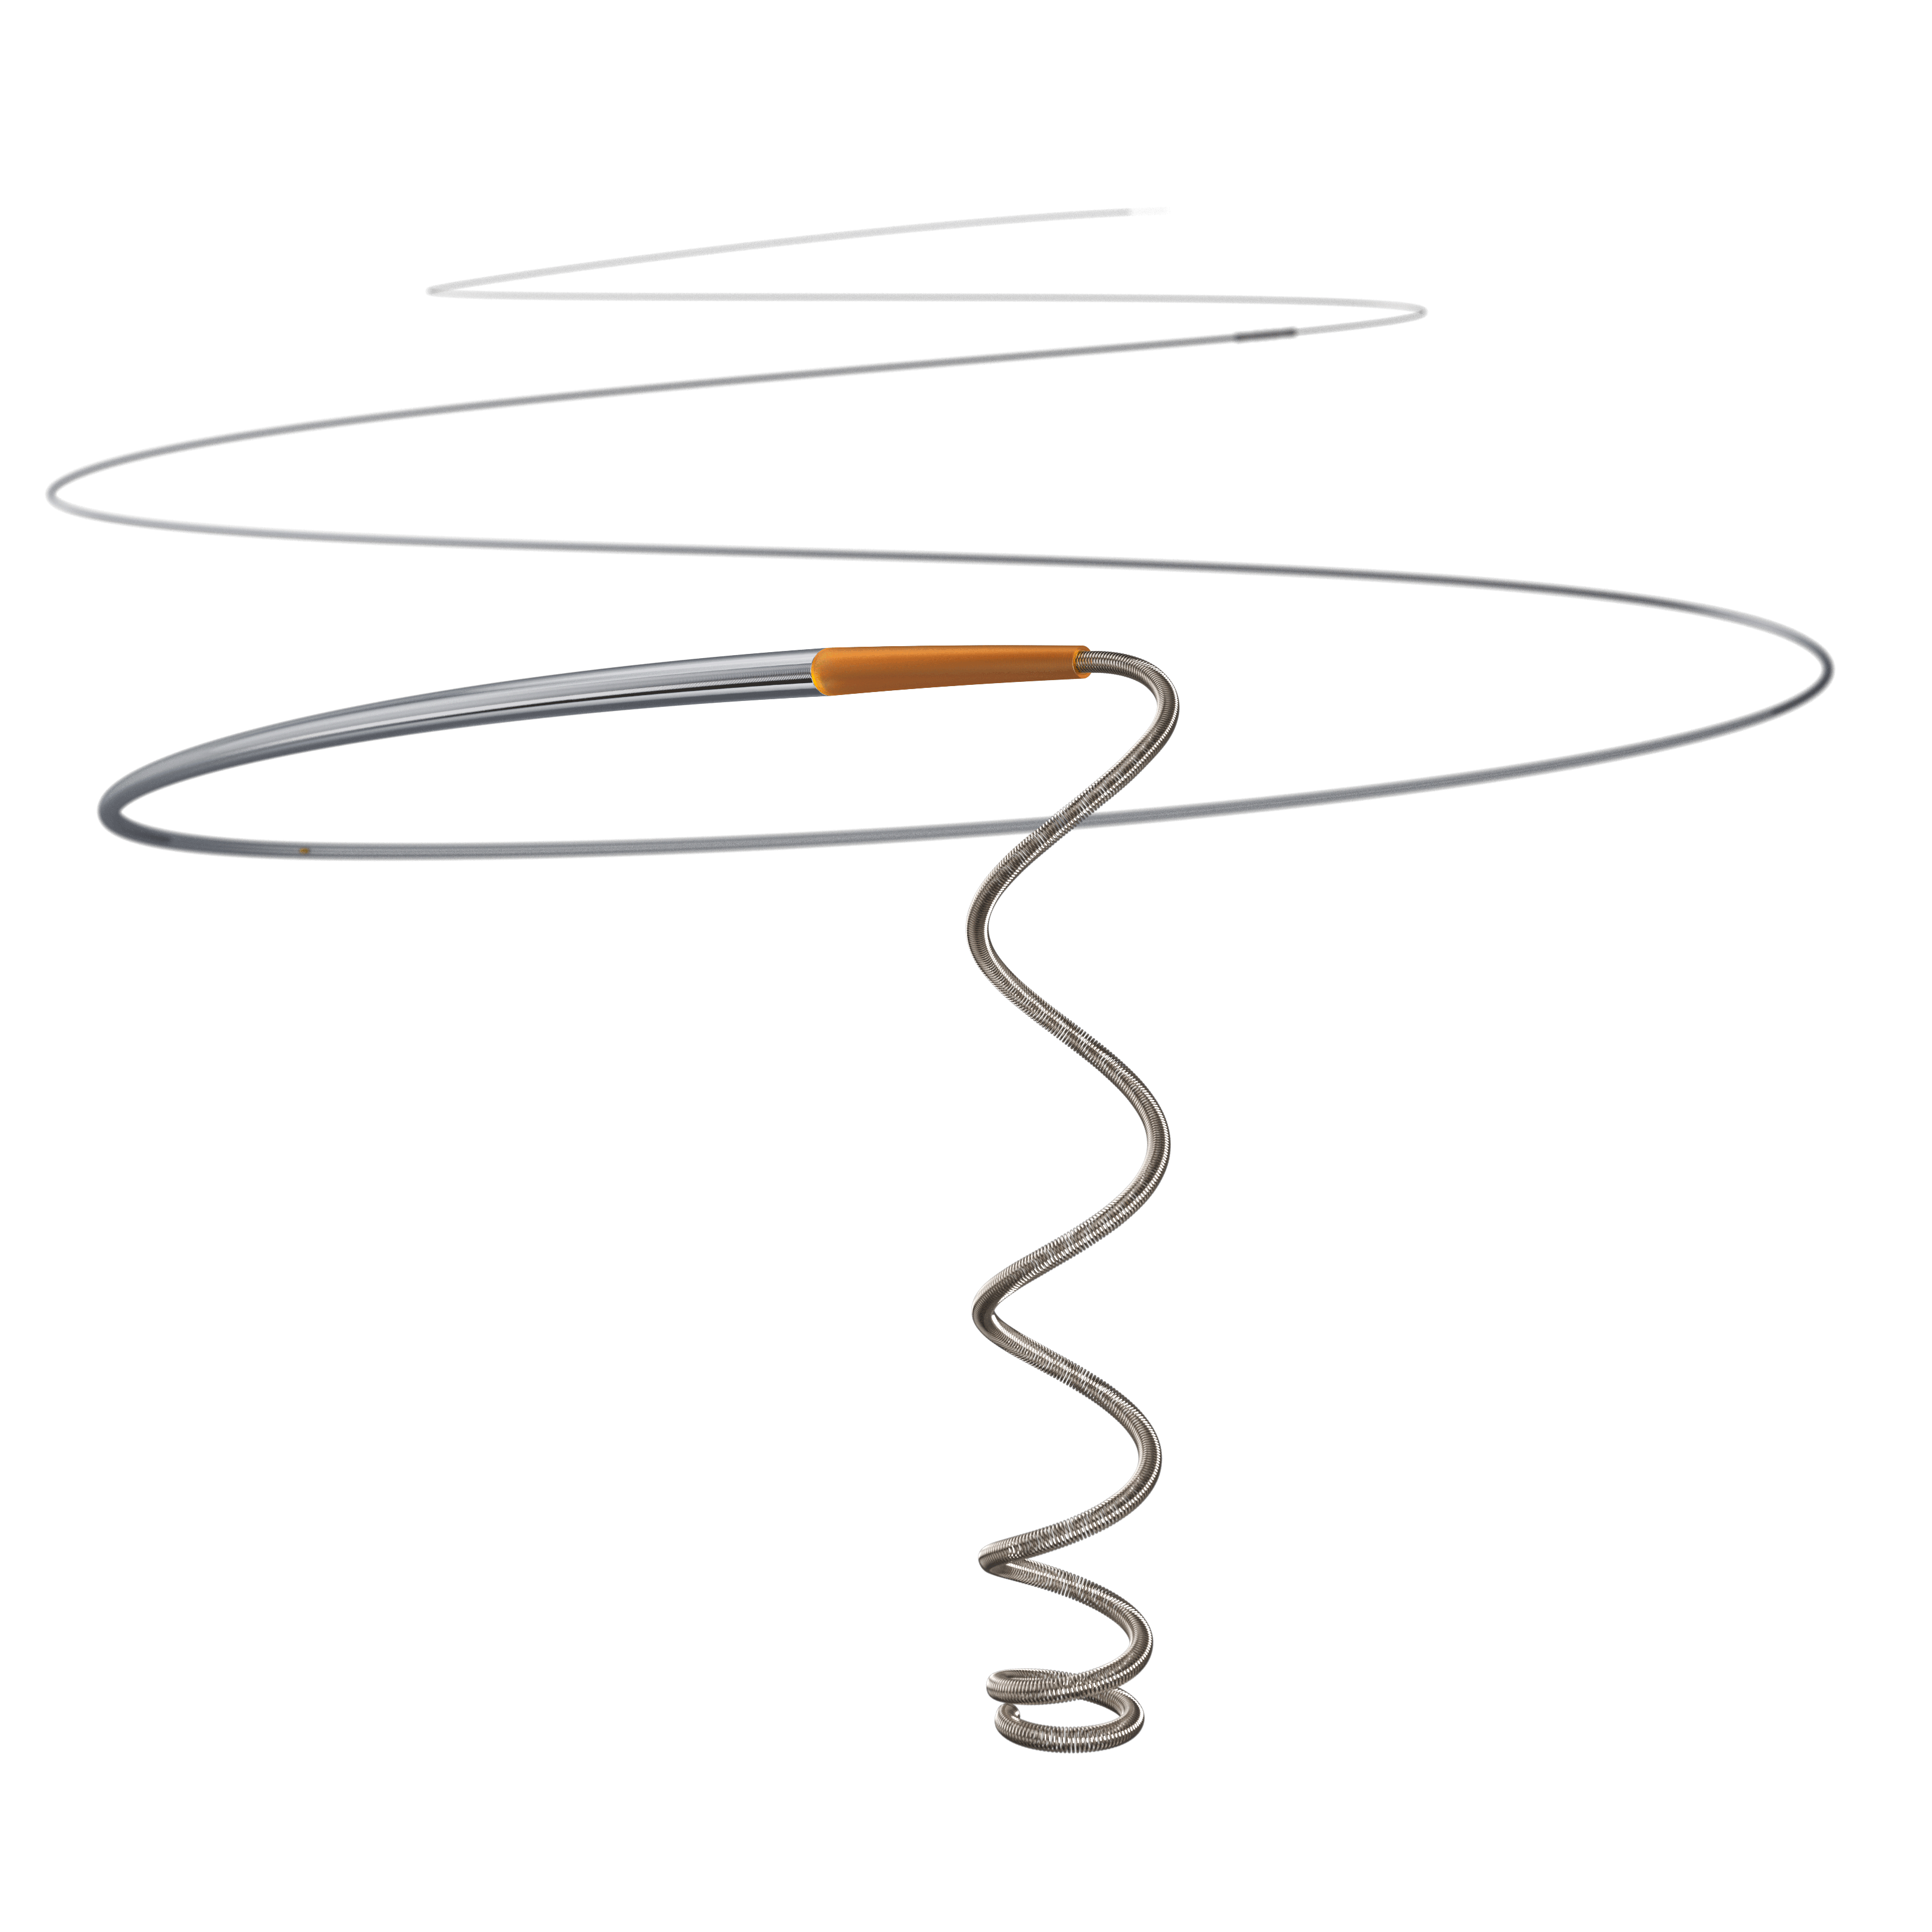 Boston Scientific Embold Detchable Coil System with a microcatheter against a white background.